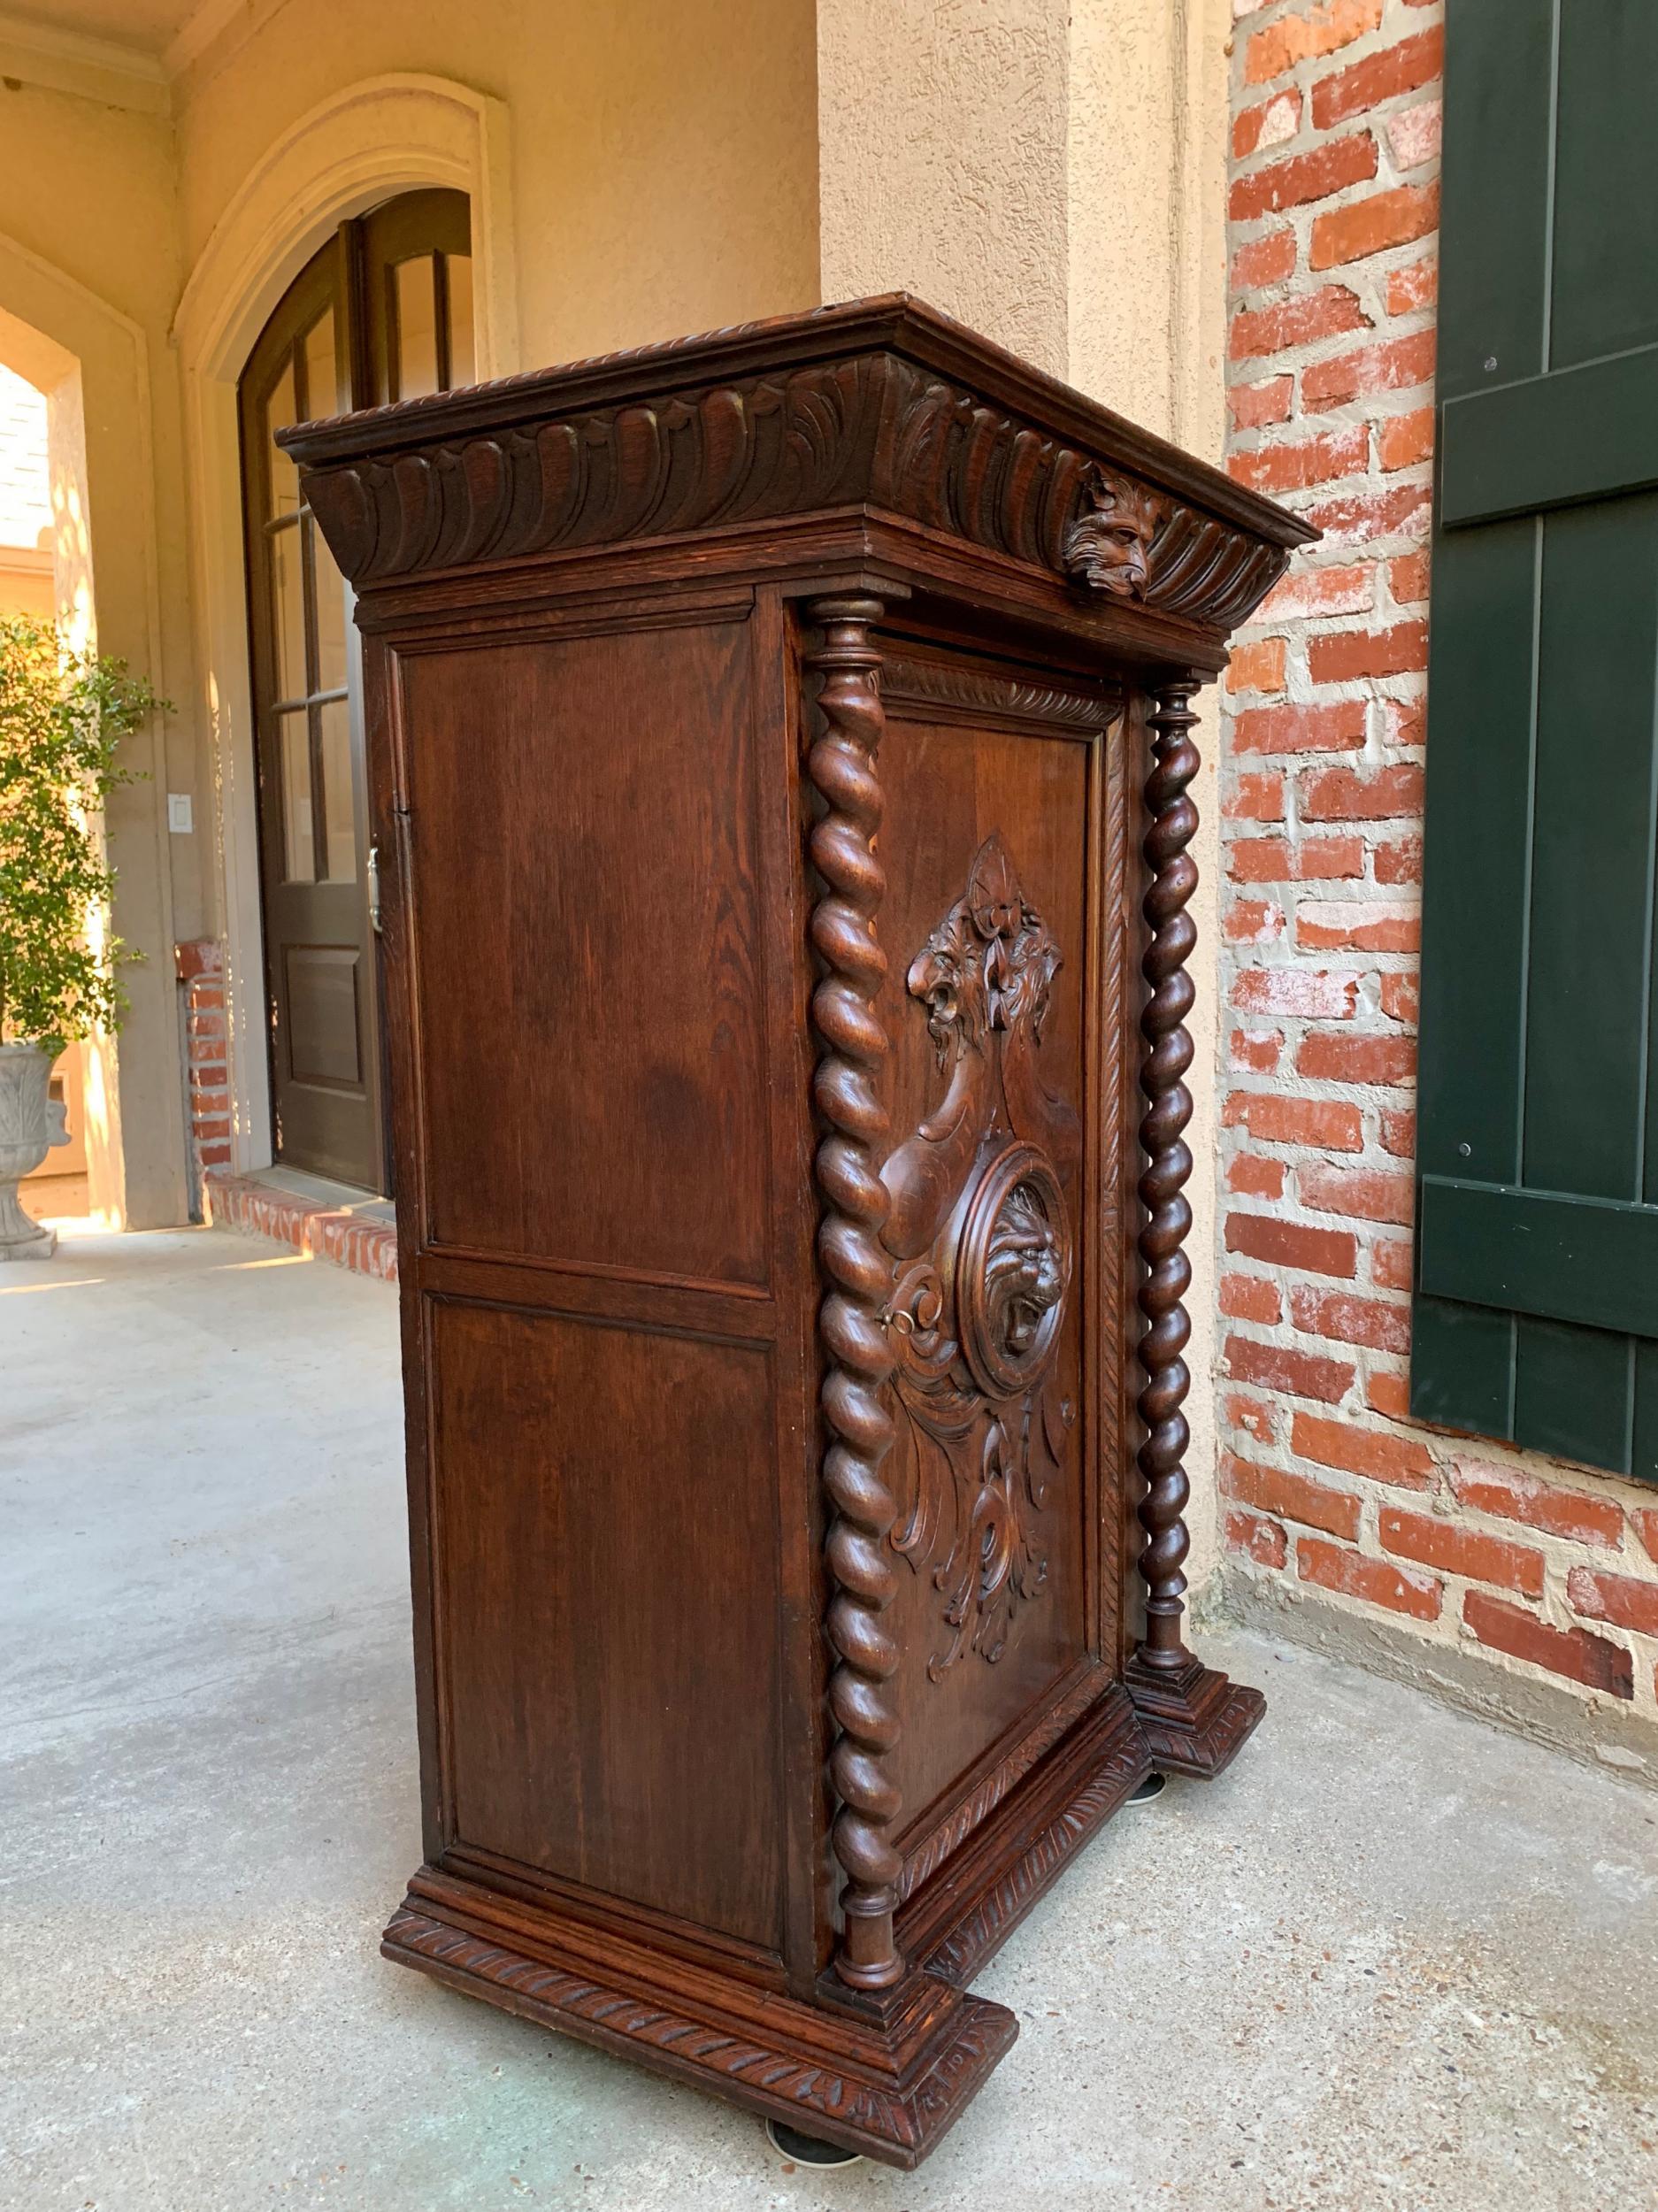 Hand-Carved 19th Century French Confiturier Jam Cabinet Carved Oak Barley Twist Louis XIV